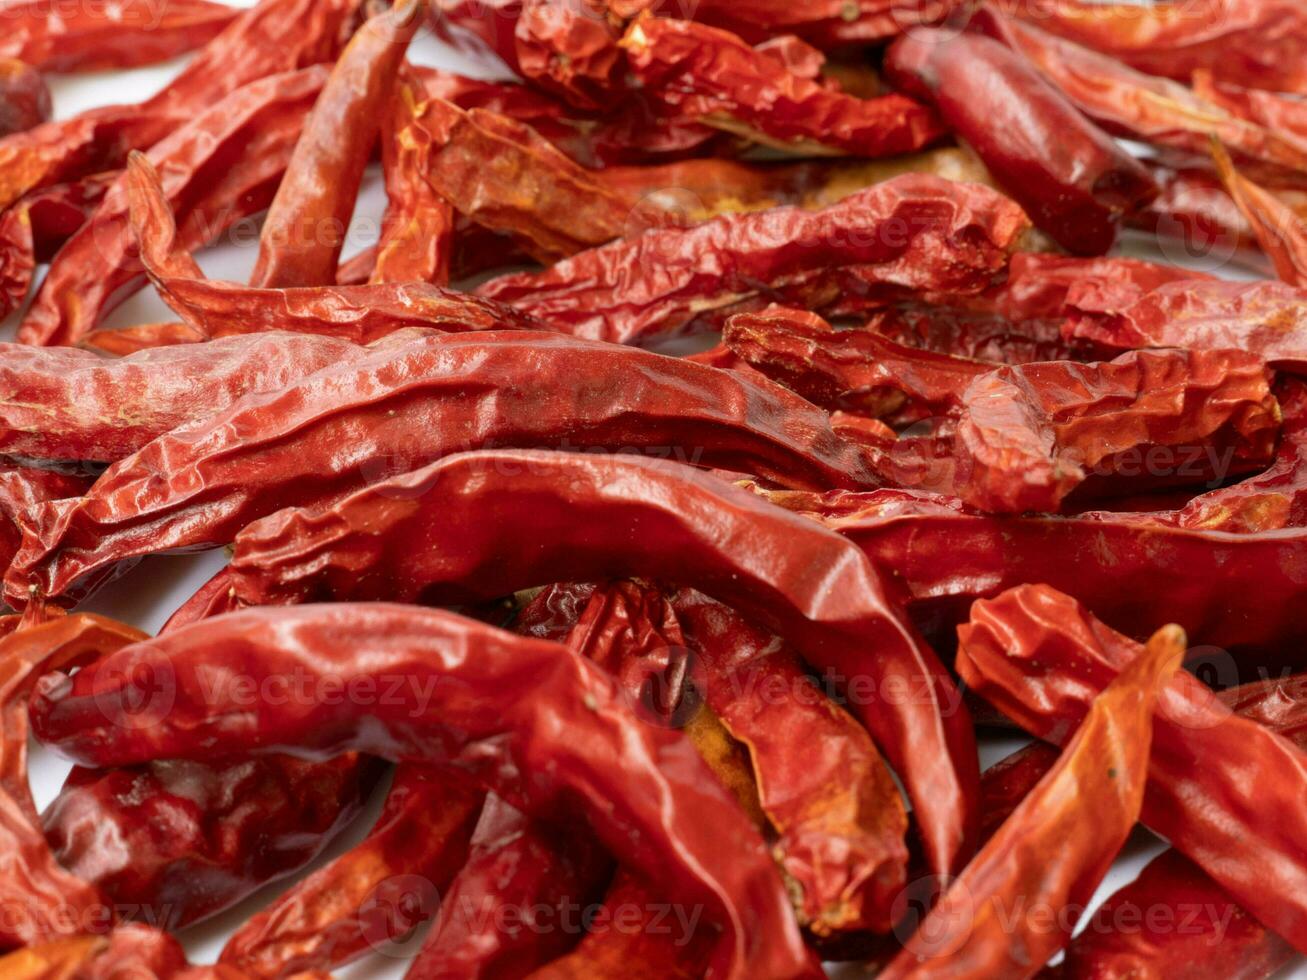 Several dried red peppers piled together photo